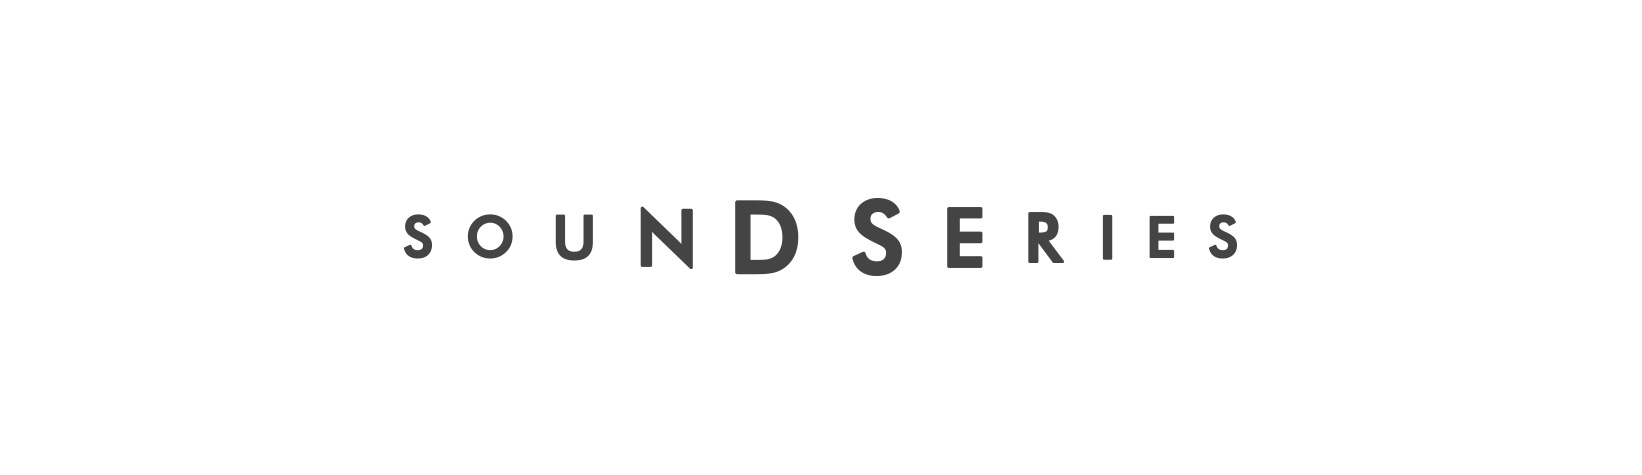 Sound Series logo for The Andy Warhol Museum